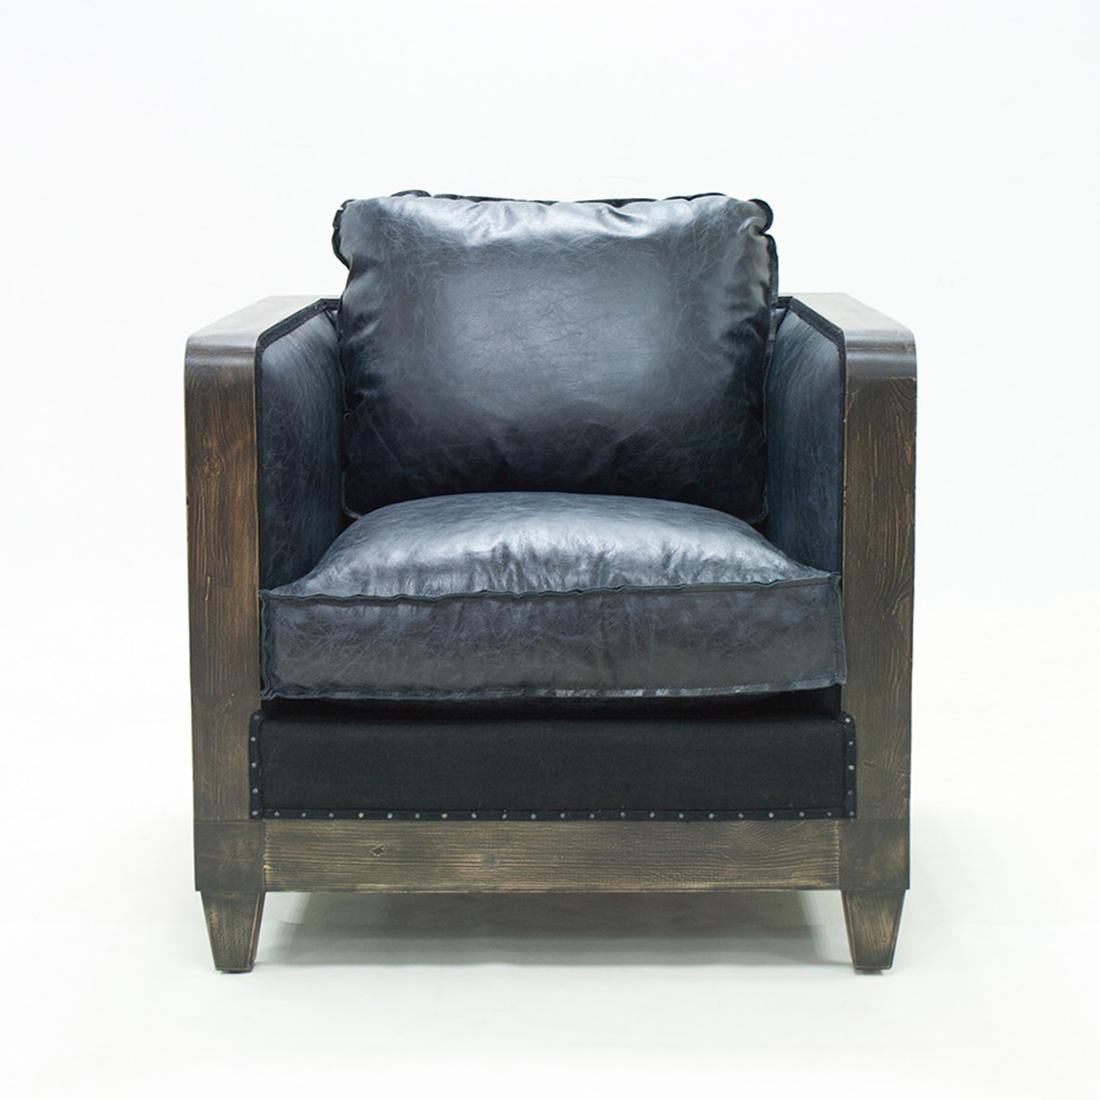 Armchair black cannage with structure in solid
vintage patinated wood. With natural cannage in vintage finish.
Upholstered and covered with natural black leather in vintage finish.
Also available with other leather color on request with
15%